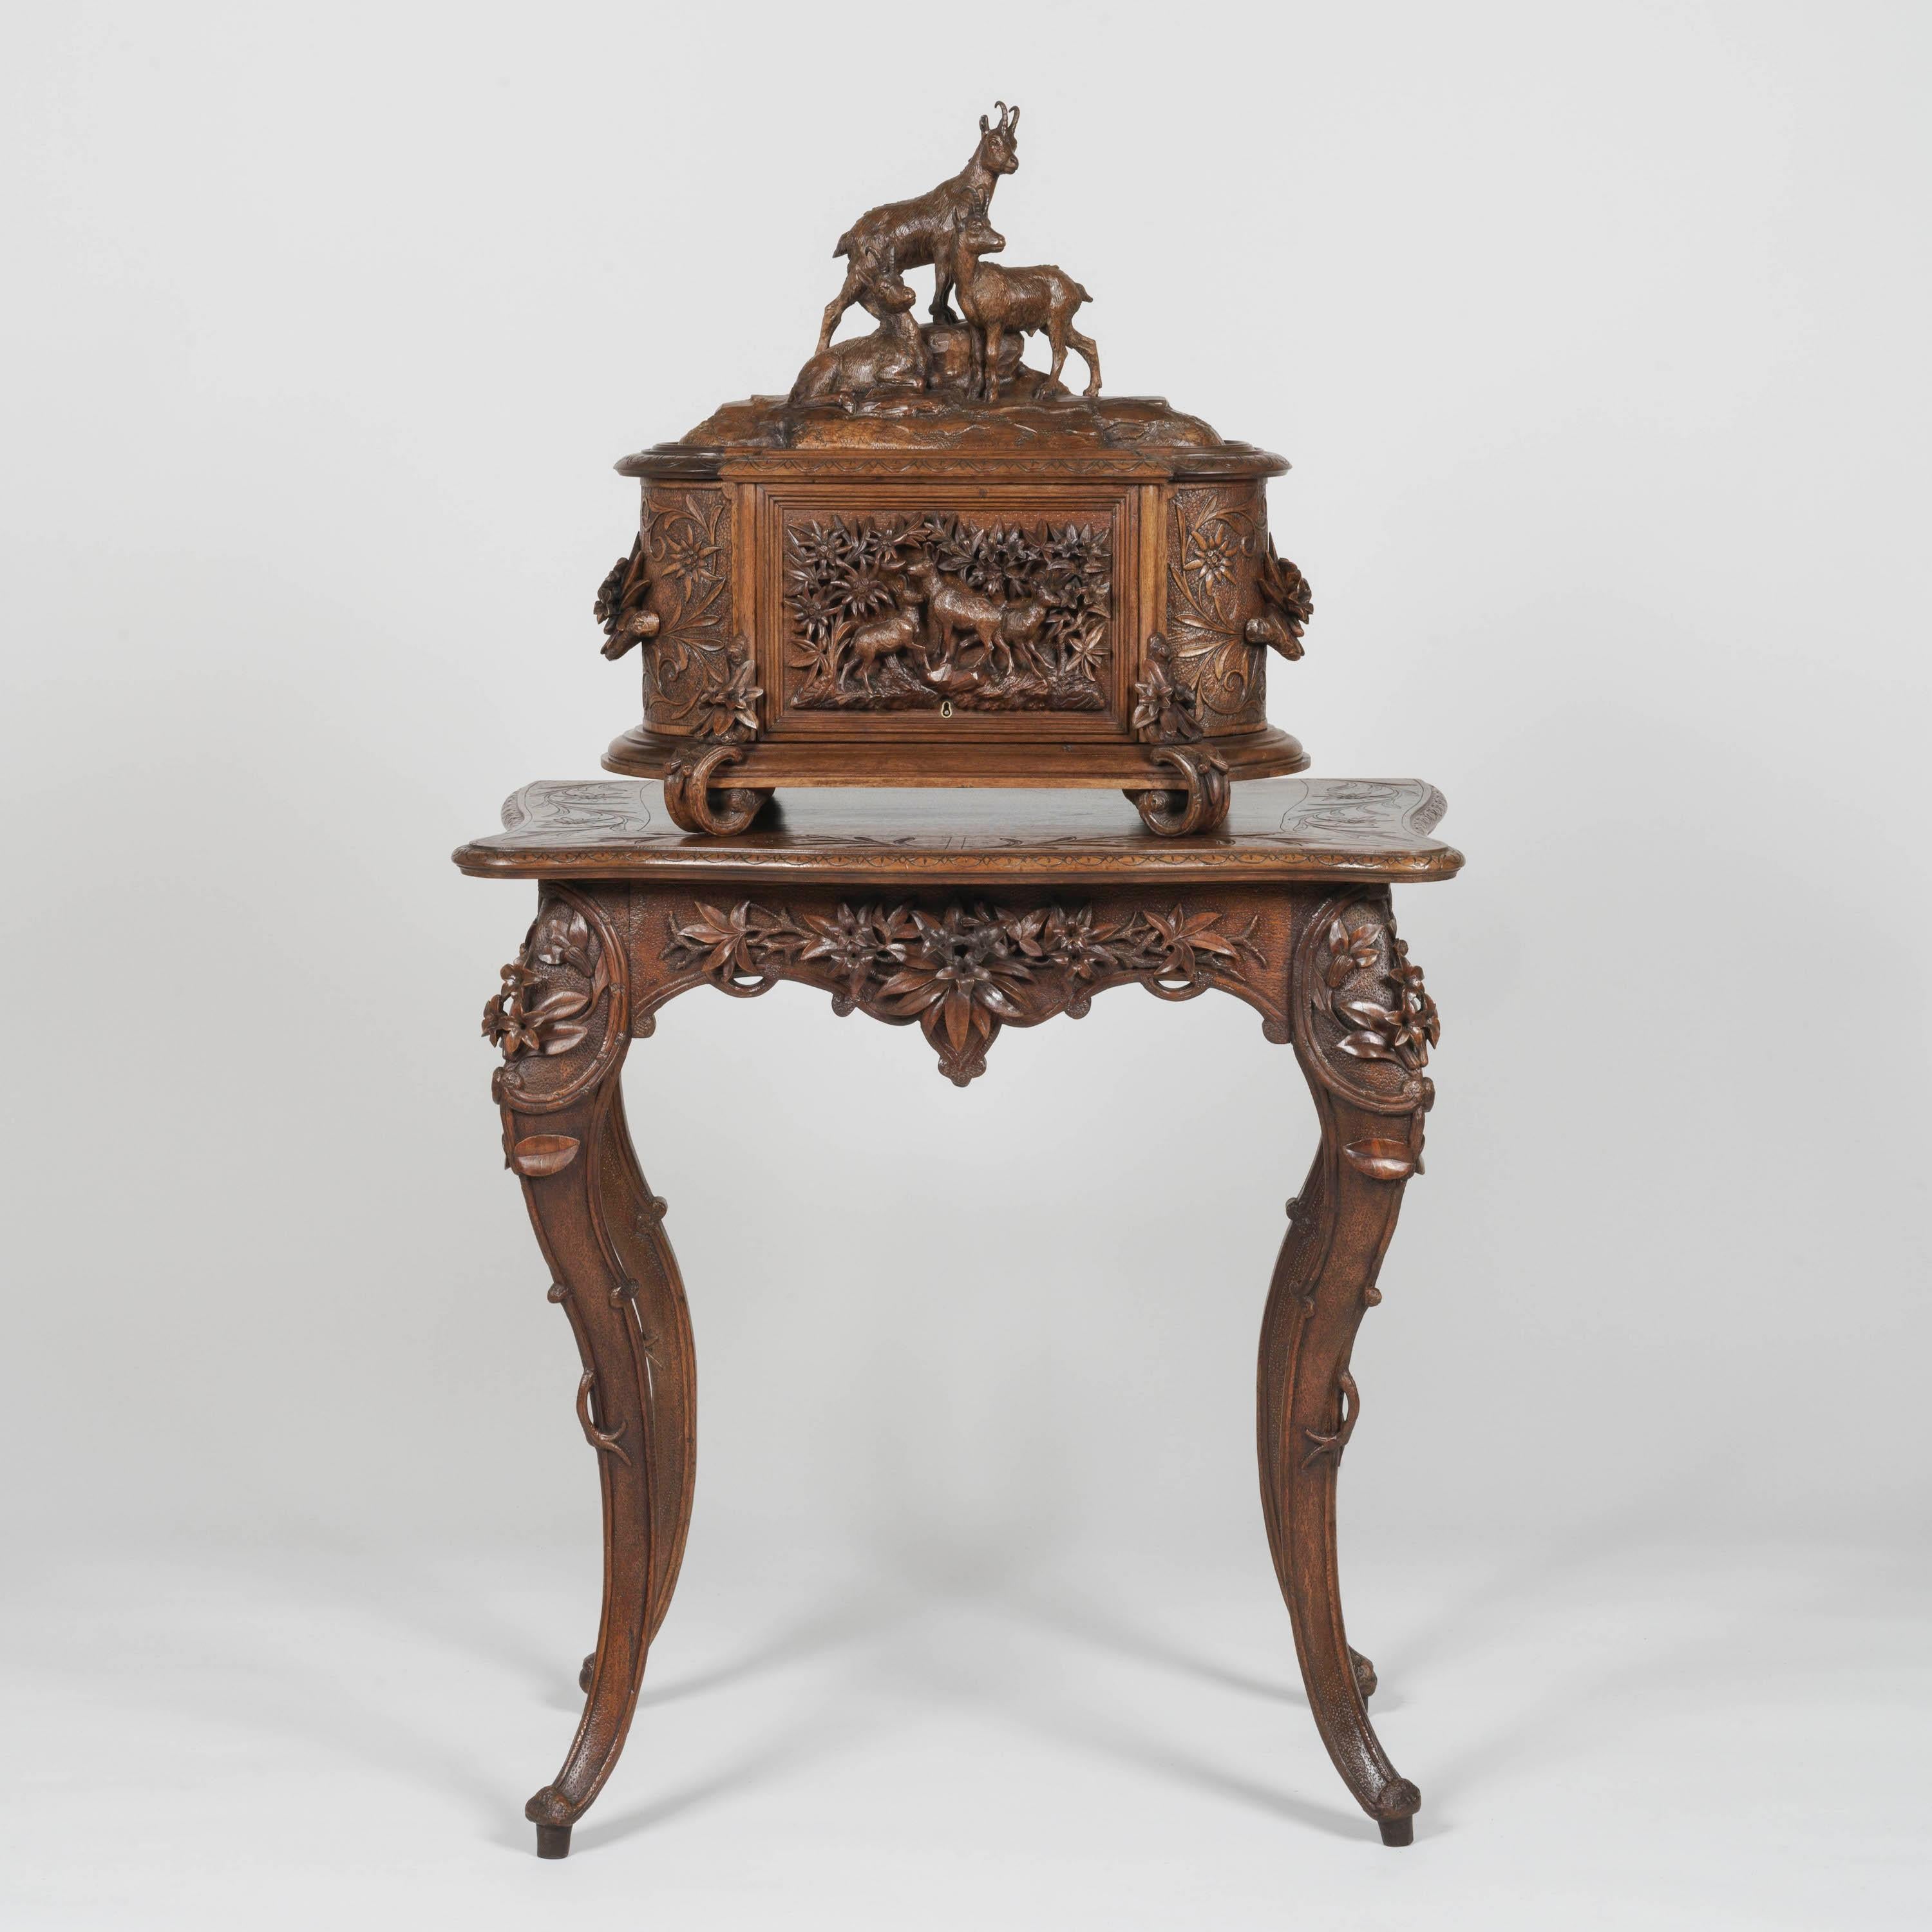 A magnificent 'Black Forest' carved
Drinks cabinet on stand

Hand-carved from Lindenwood, the drinks box of D-end shape carved in exquisite high relief, the front panel depicting a flock of goats surrounded by tall wildflowers, the hinged sides